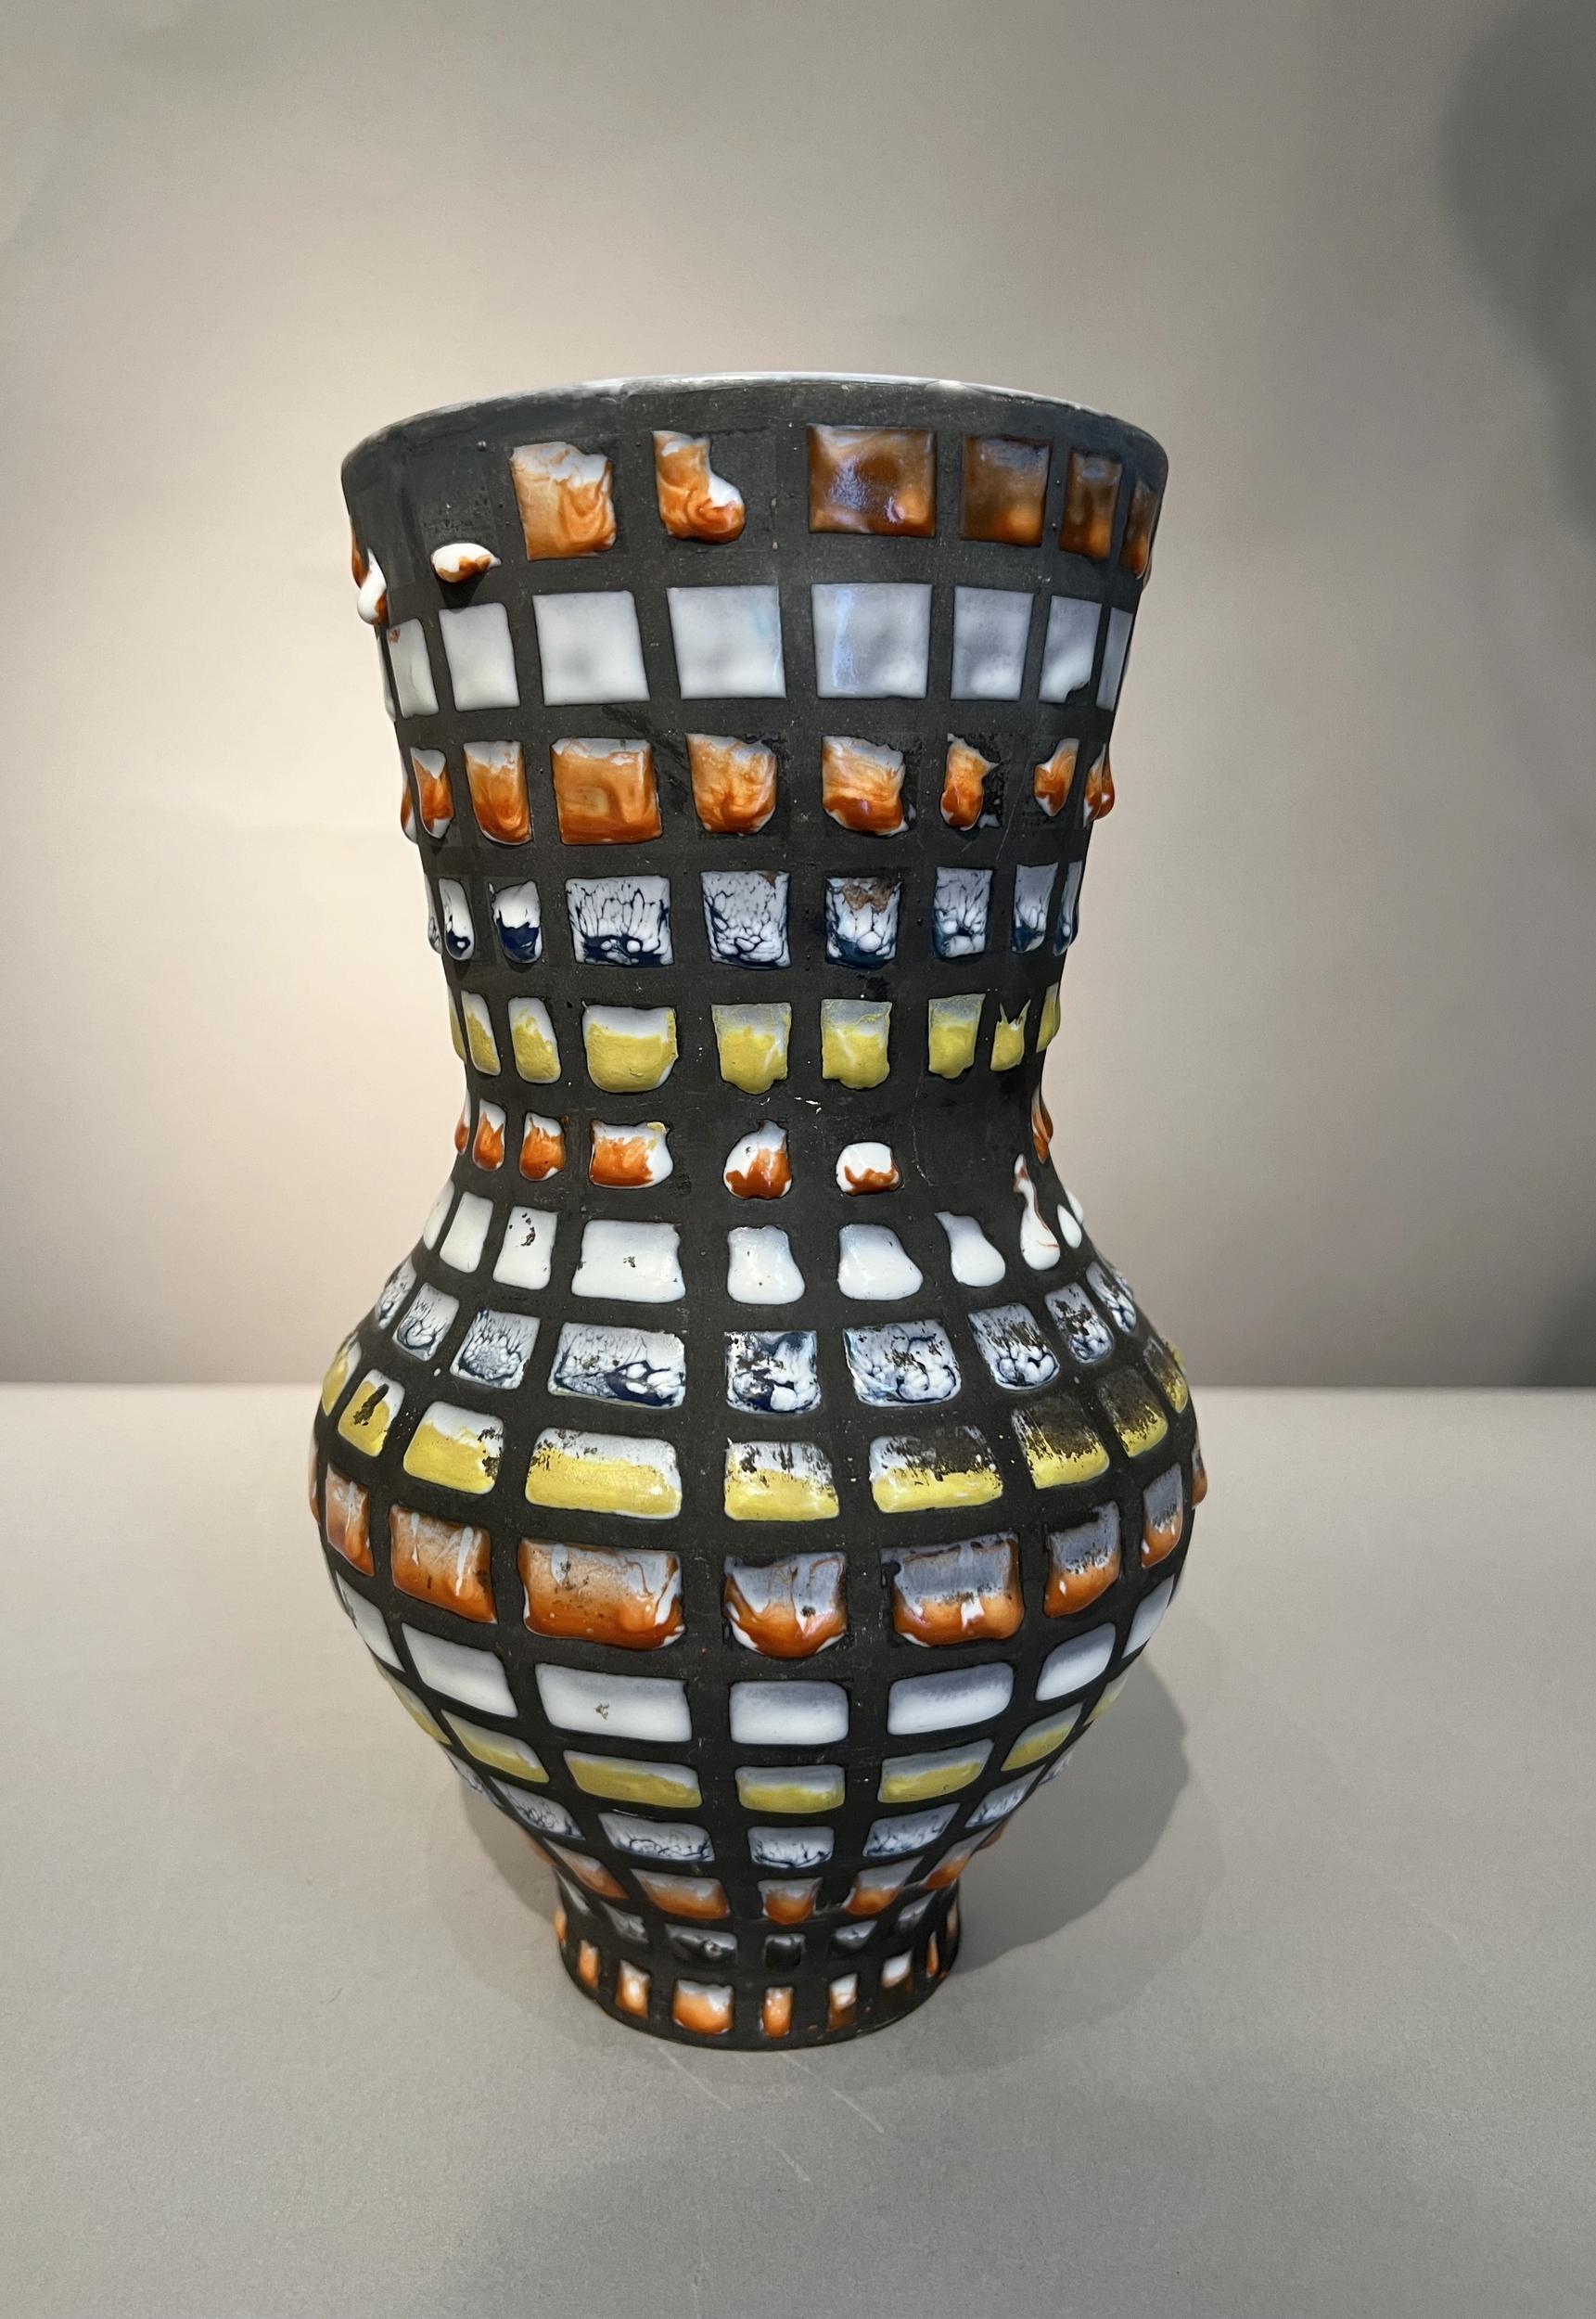 Large baluster-shaped vase with « Pyjama » design in polychrome enameled ceramic. Signed Capron Vallauris.
In perfect condition, but some original enameling defects are visible on the photos.

Roger Capron, France (1922-2006)

Roger Capron, born in